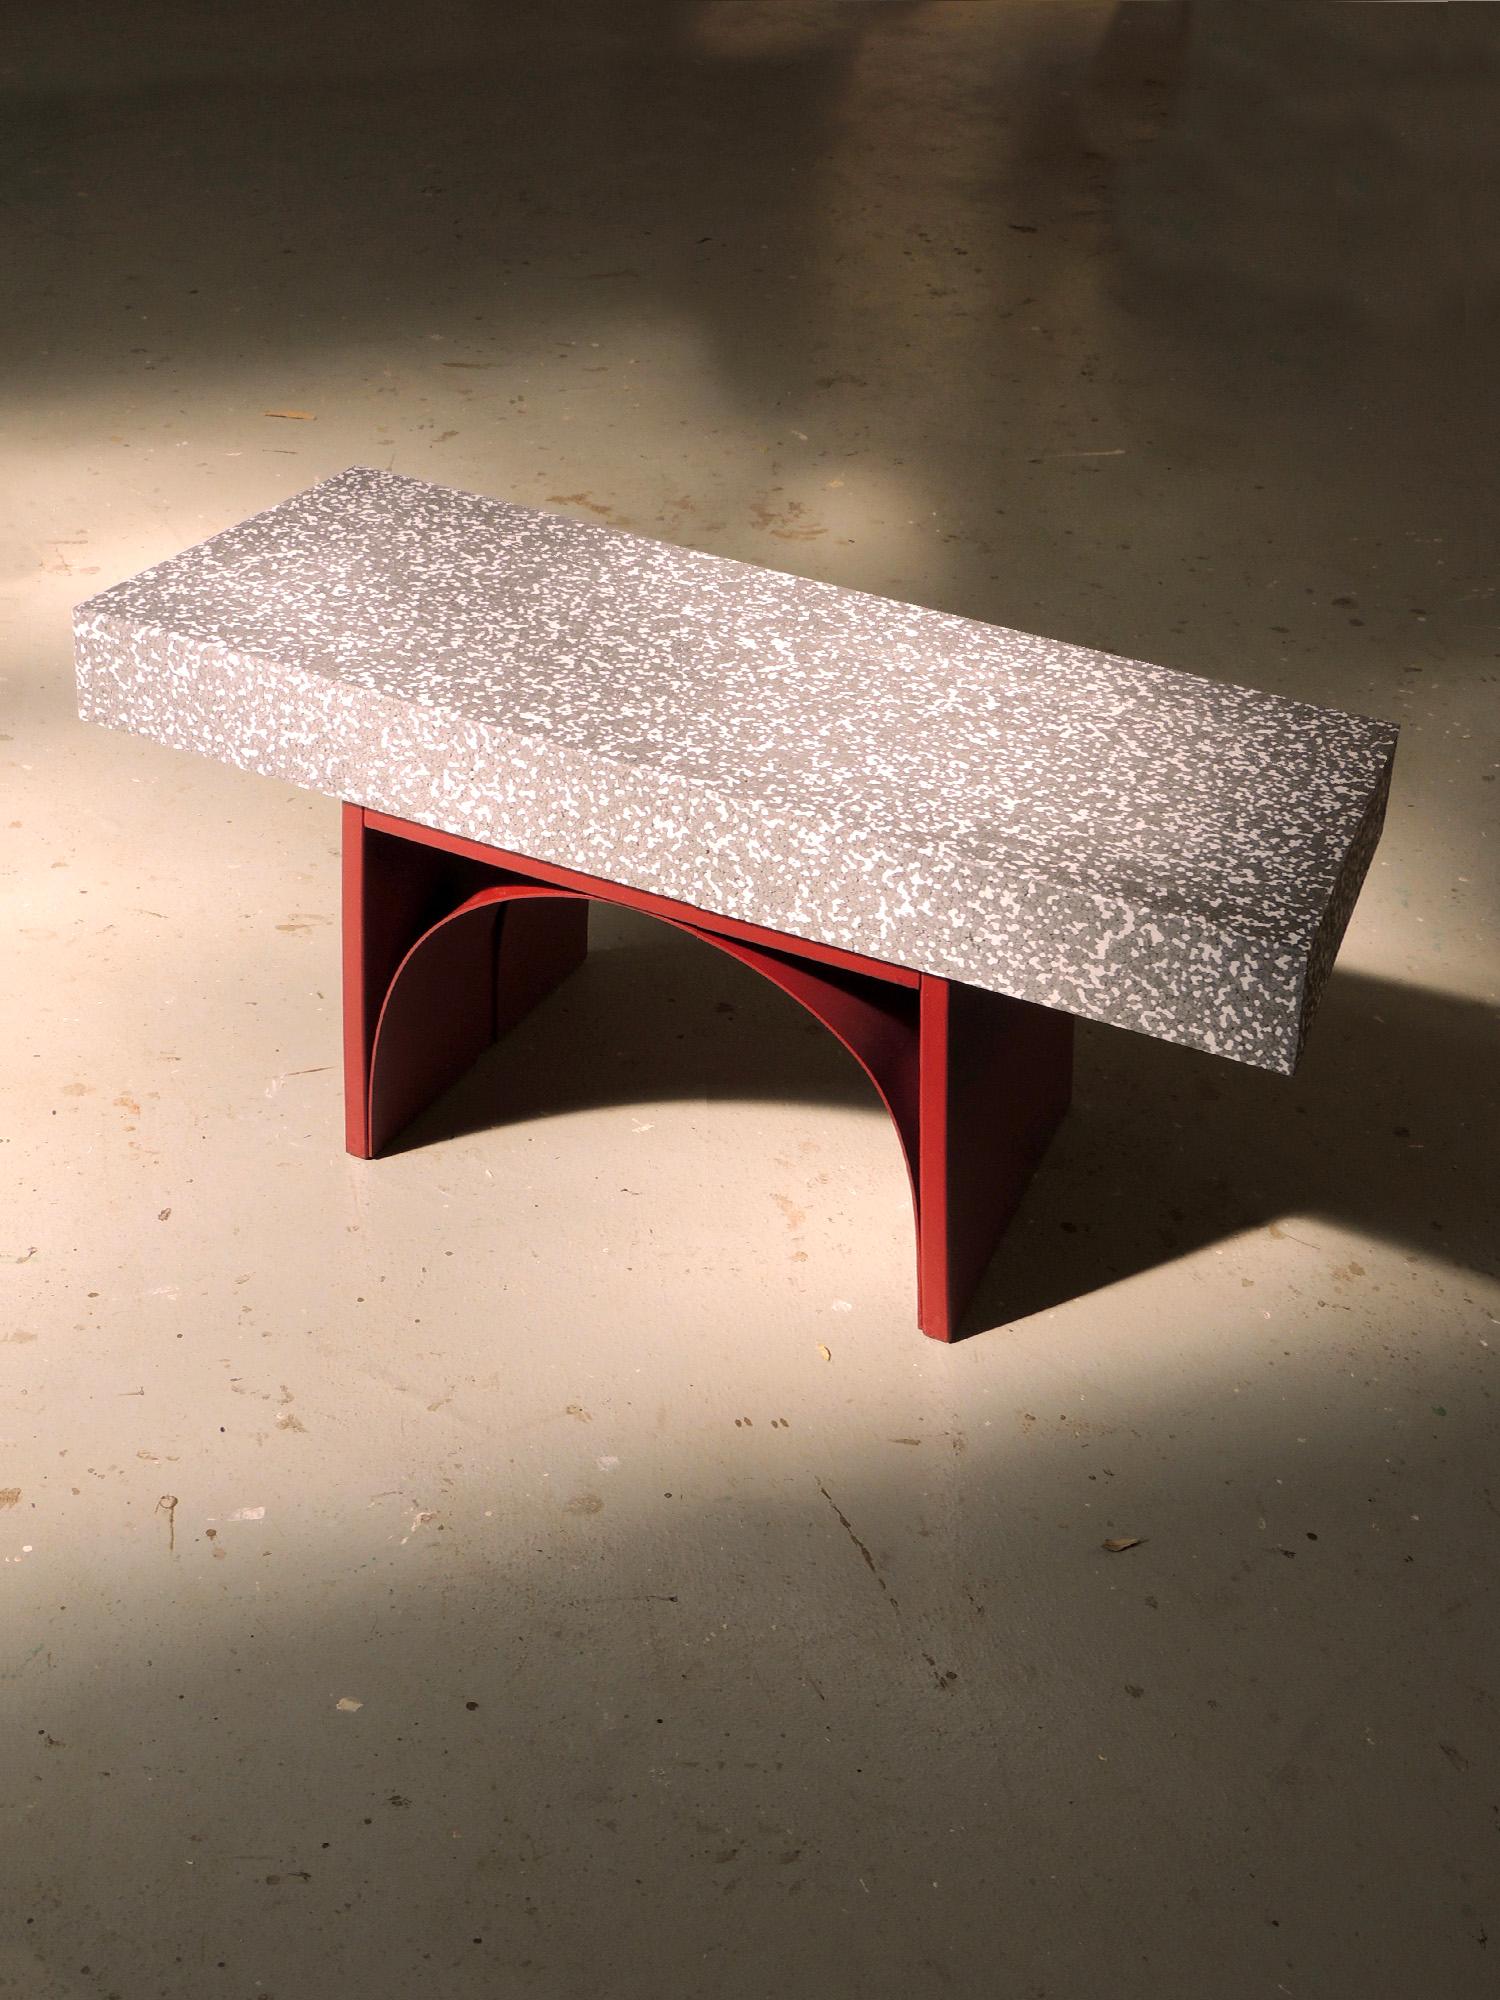 Italian 21st Century Contemporary Coffee Table Bench Handmade in Italy by Ilaria Bianchi For Sale